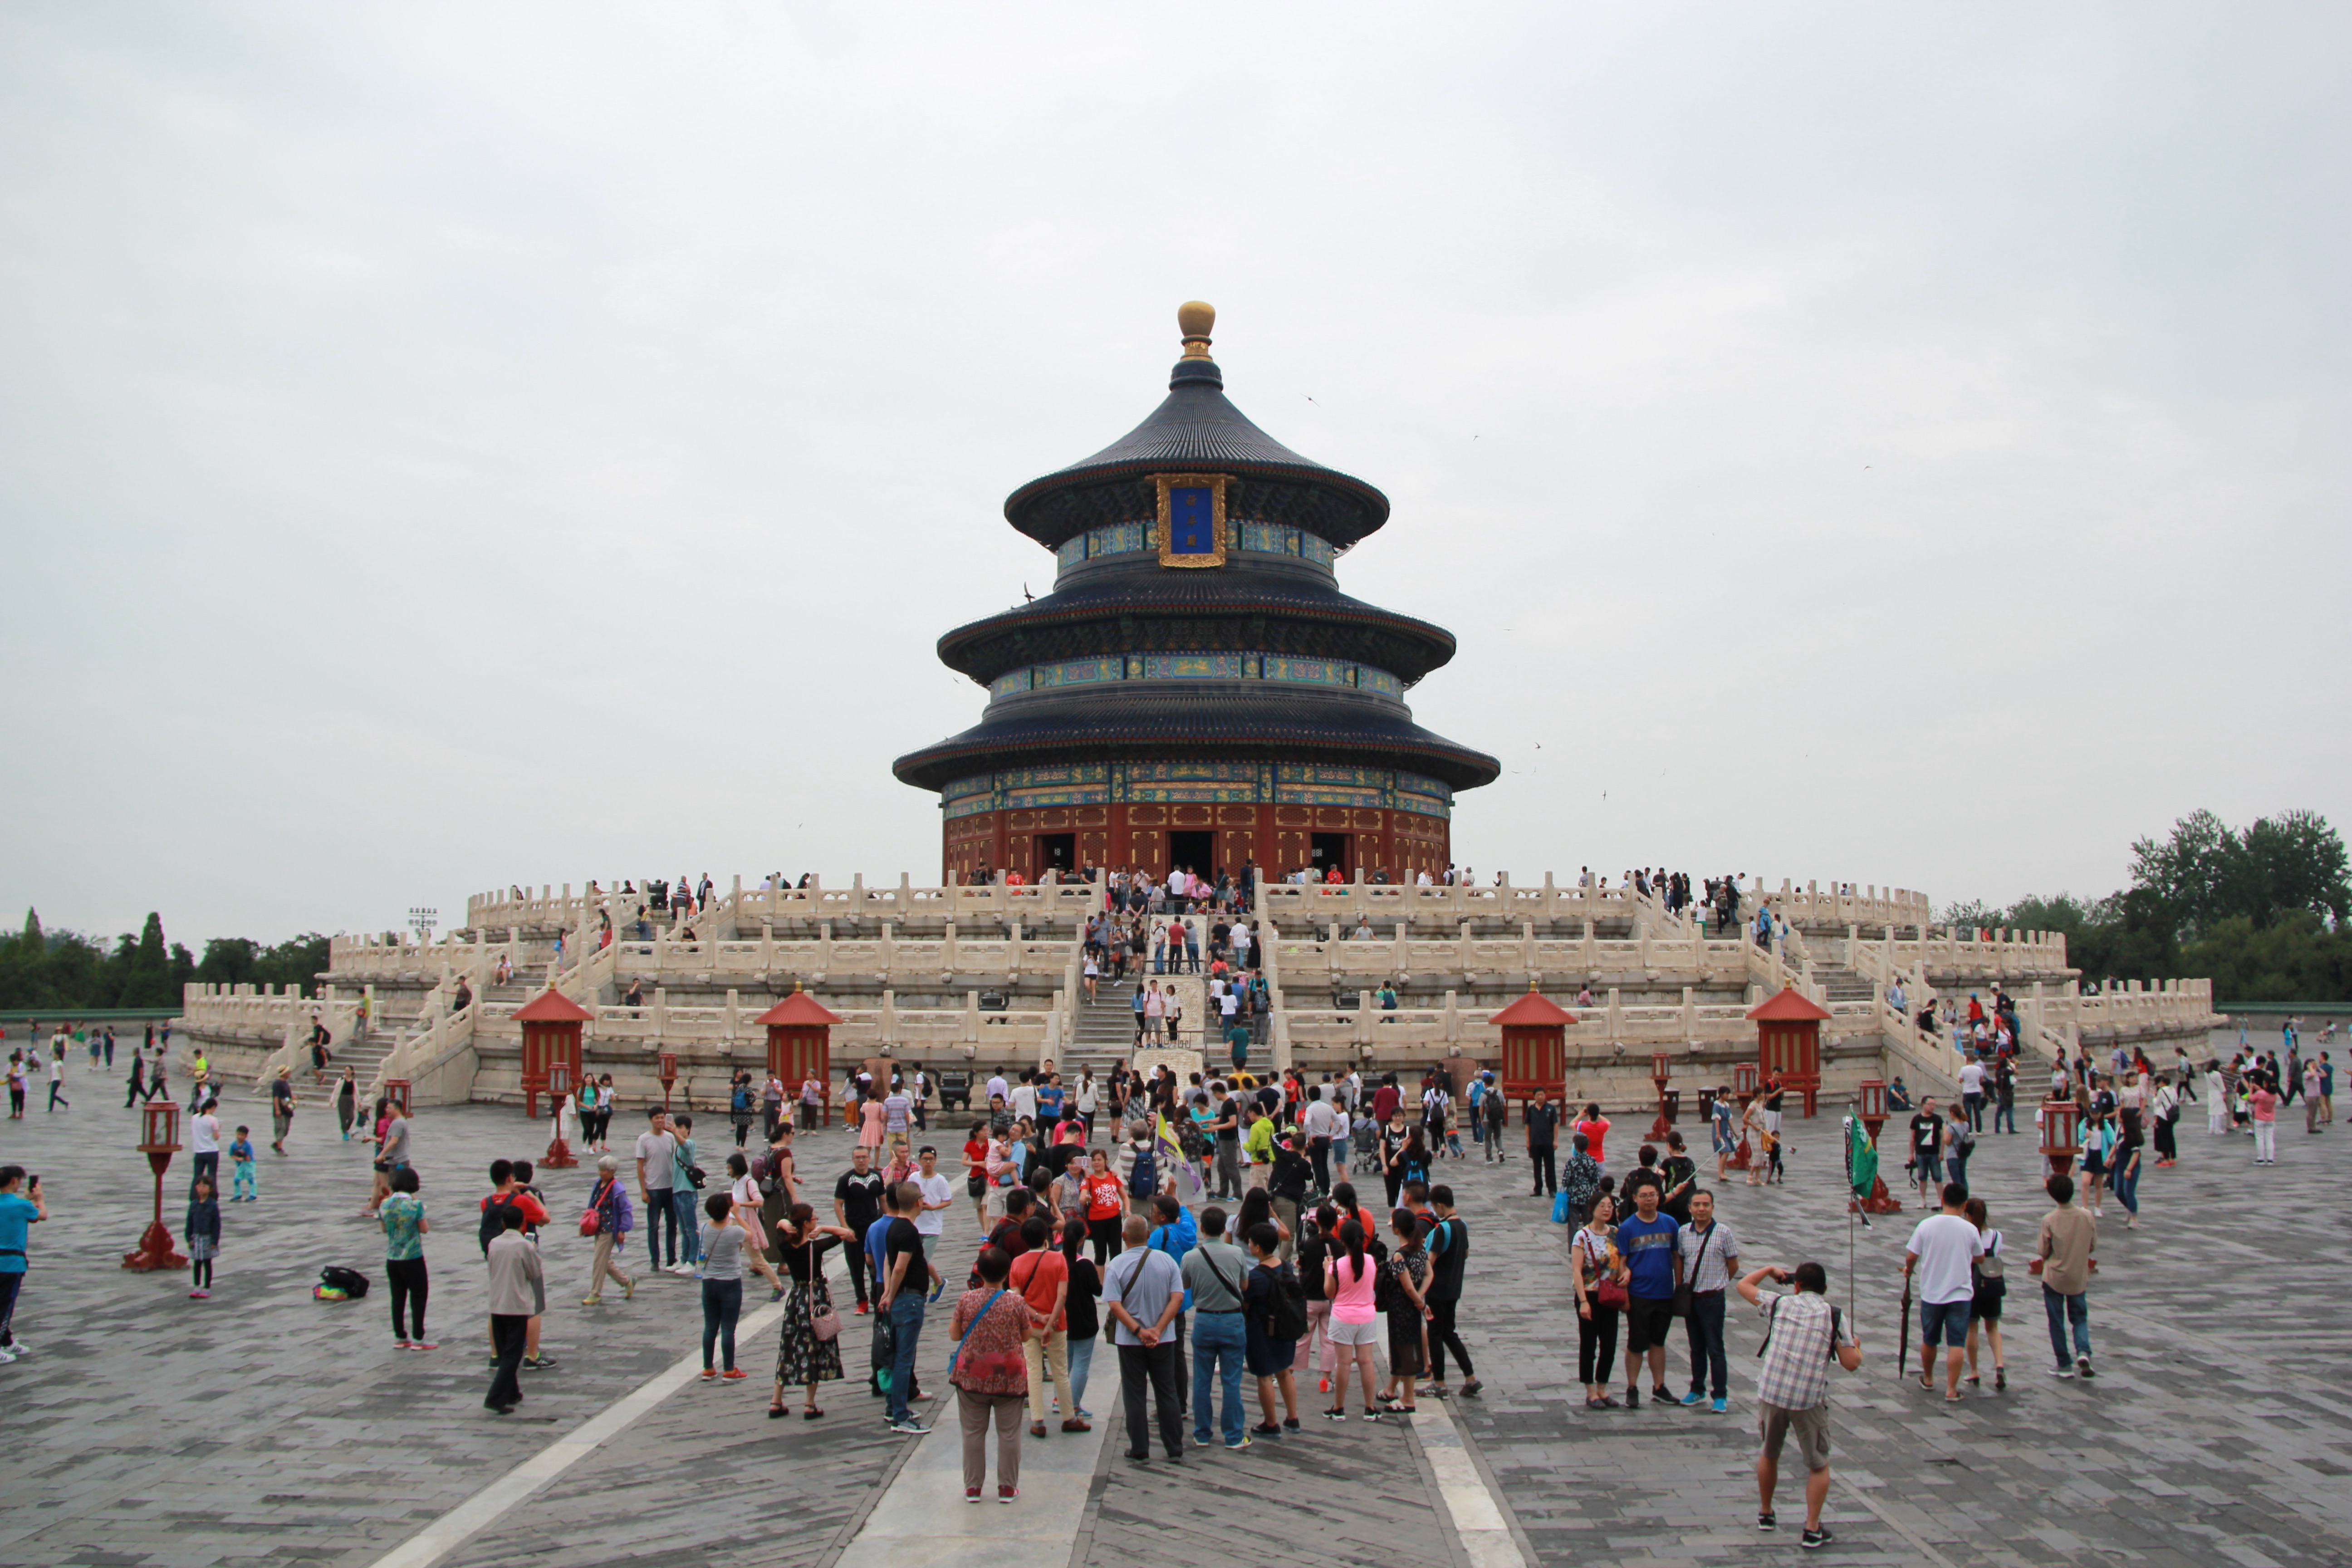 Day 4: To the Temple of Heaven and the high speed train run in Beijing, China